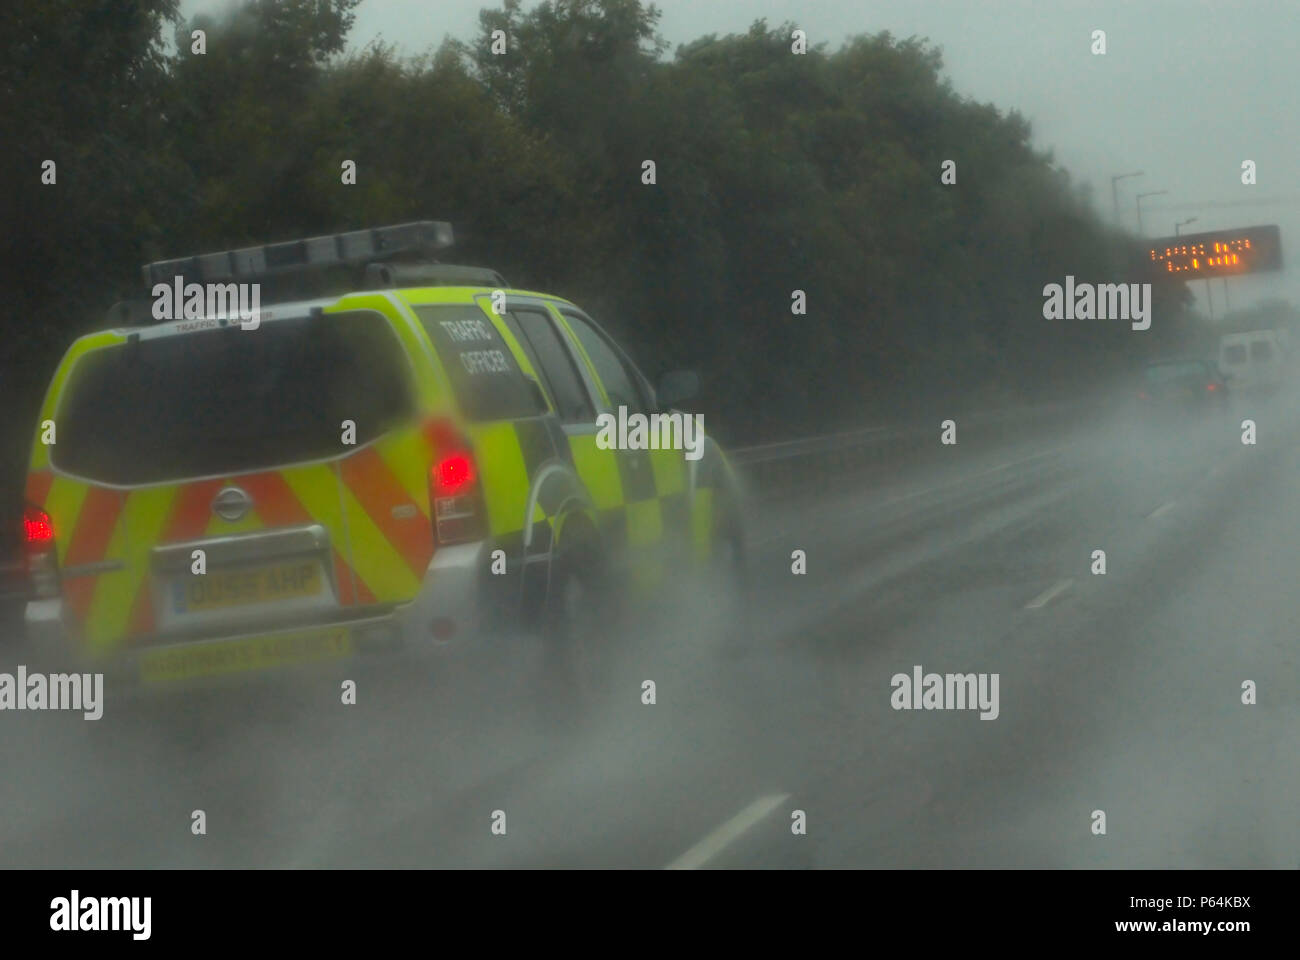 Traffic police vehicle in poor wet driving conditions on the M6 motorway, UK Stock Photo